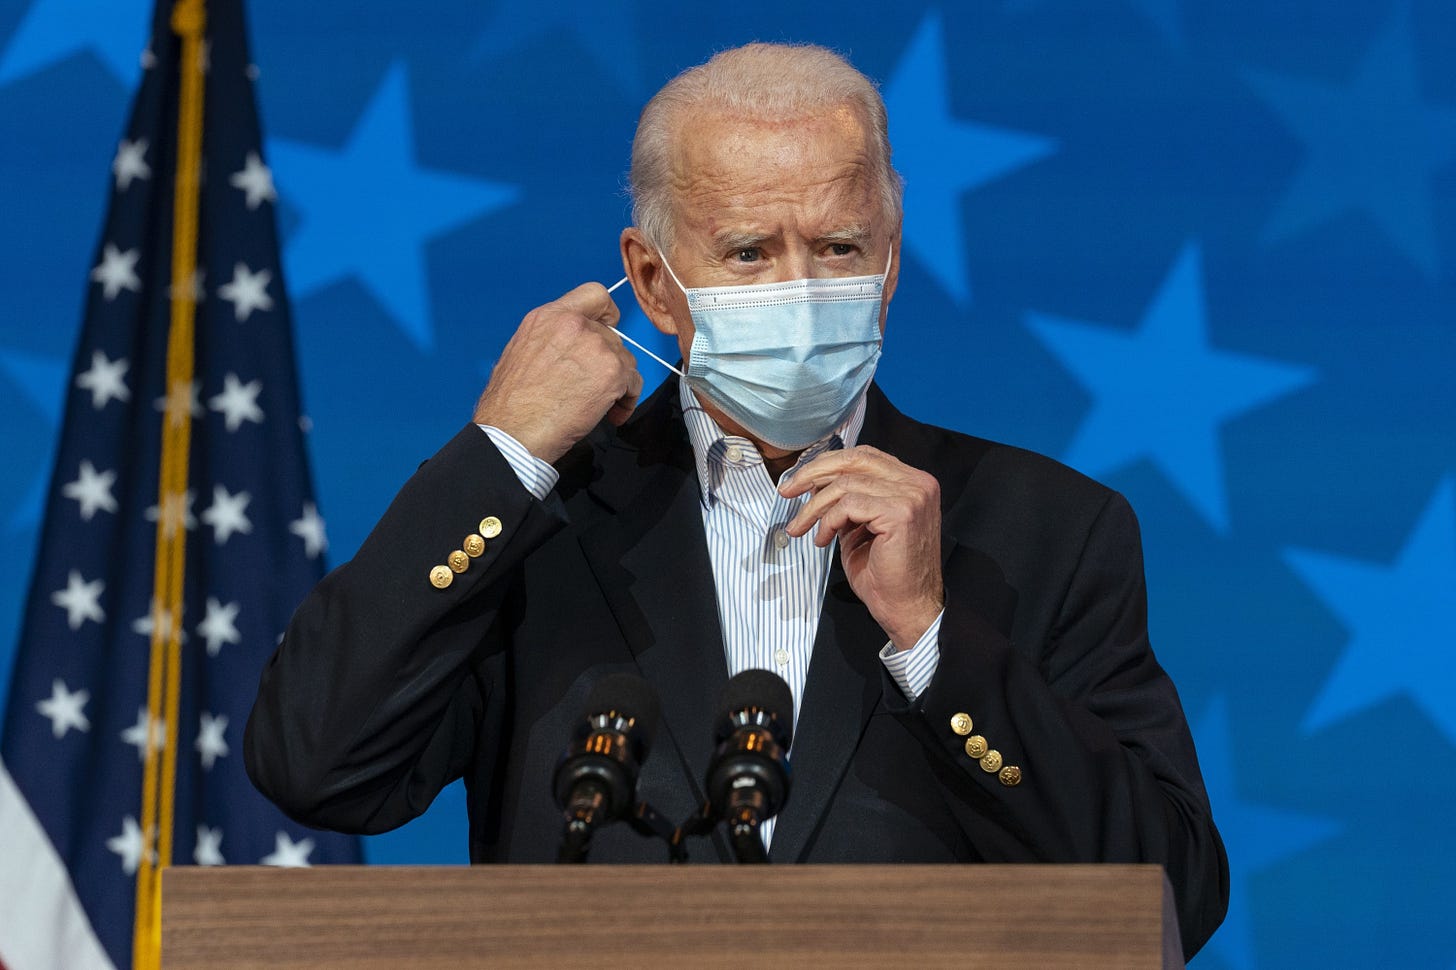 President Joe Biden stands in front of a podium. He is removing a surgical mask from his face. The background is blue with white stars, and an American flag hangs behind him. The look on Biden's face is stern.